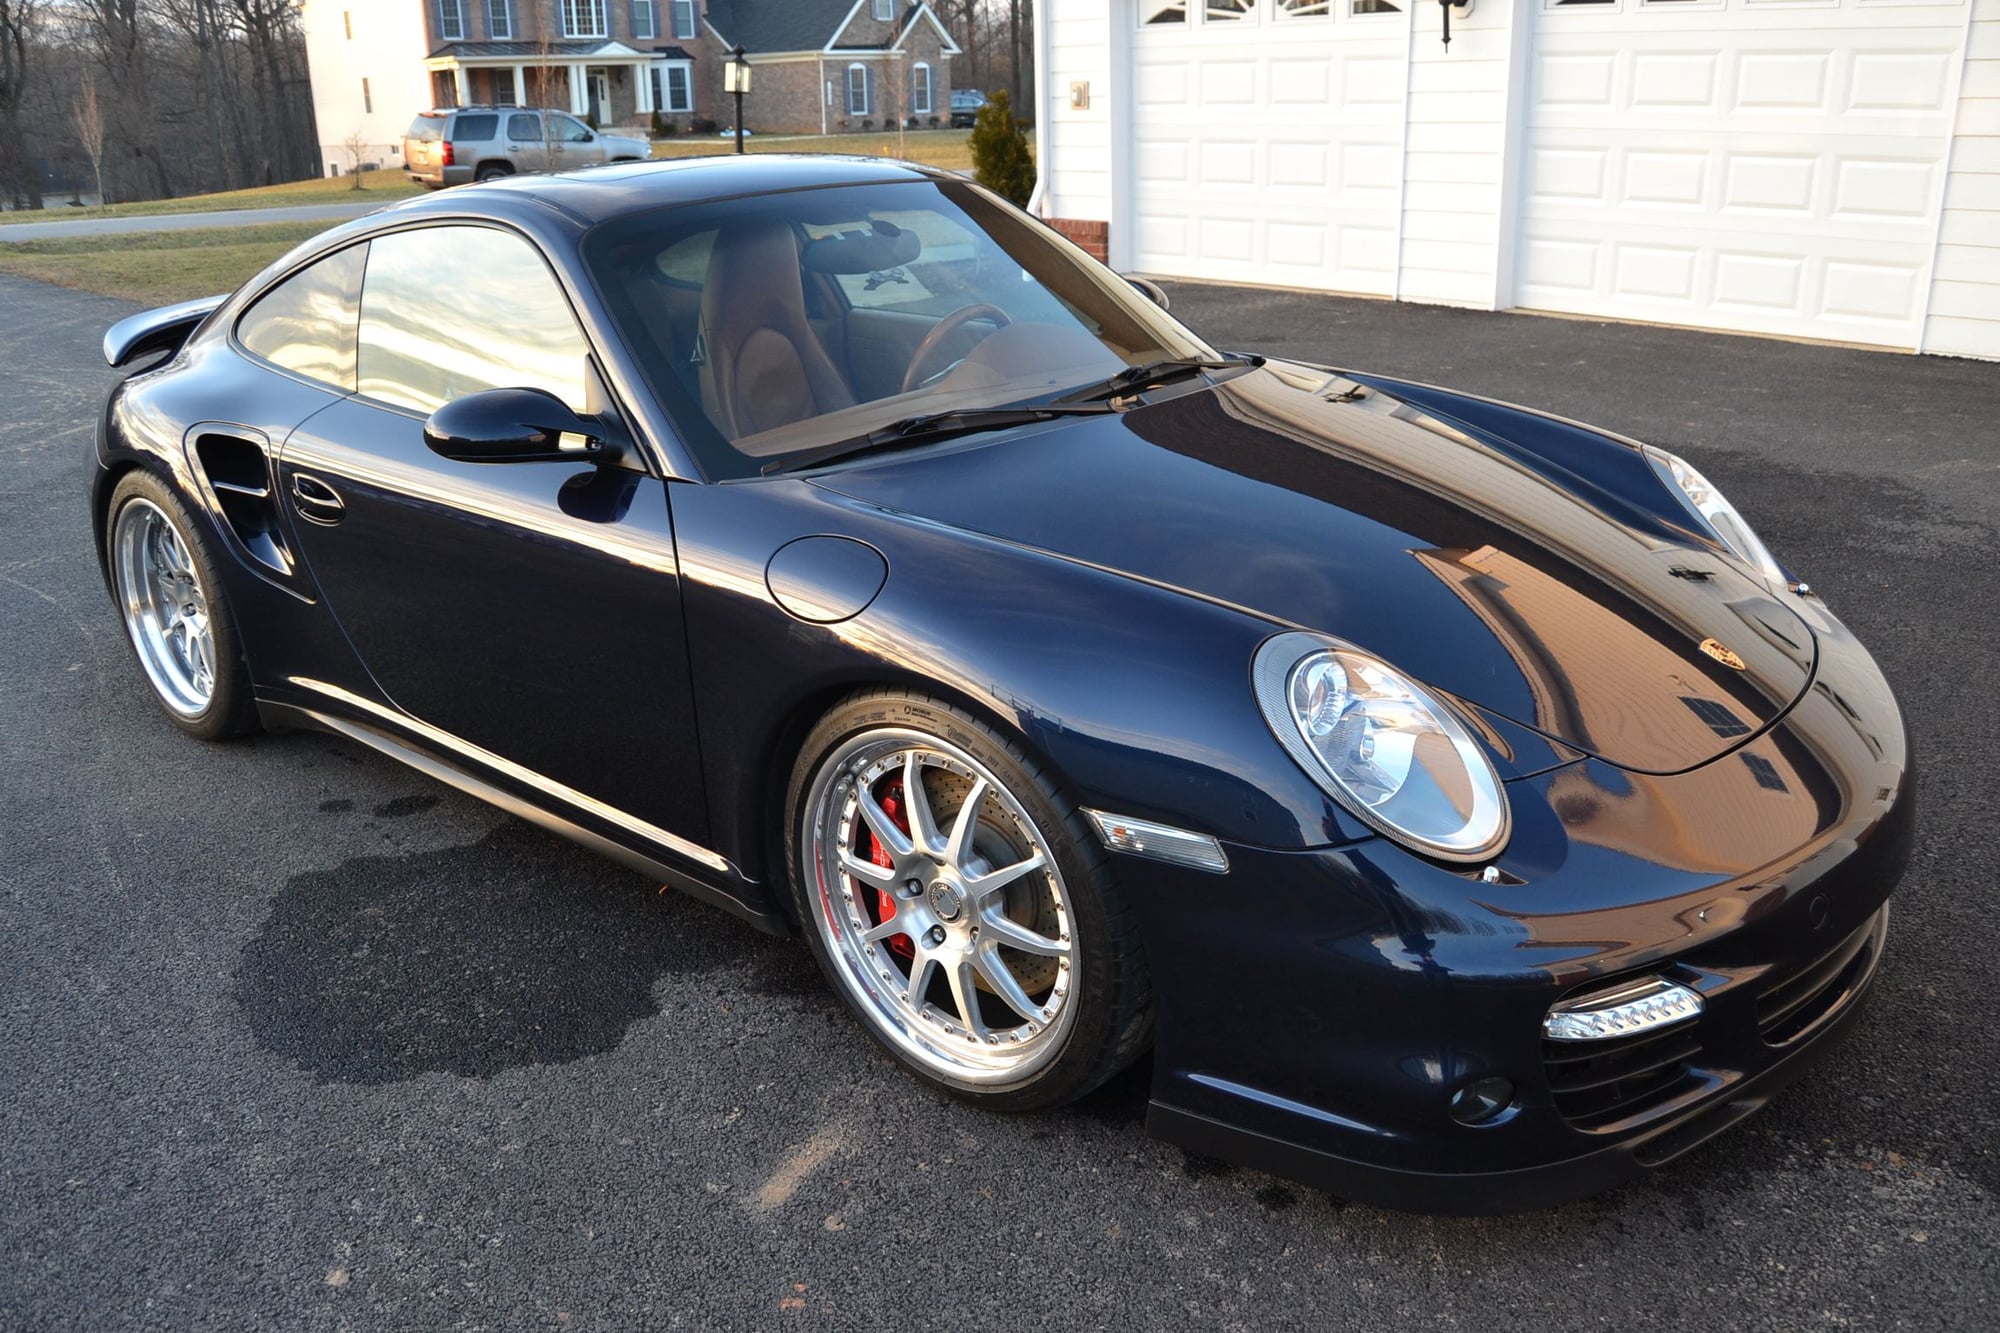 2007 Porsche 911 - 2007 911 Turbo 6 Speed MINT Condition - Used - VIN WP0AD29977S784987 - 38,304 Miles - 6 cyl - AWD - Manual - Coupe - Blue - Baldwin, MD 21013, United States